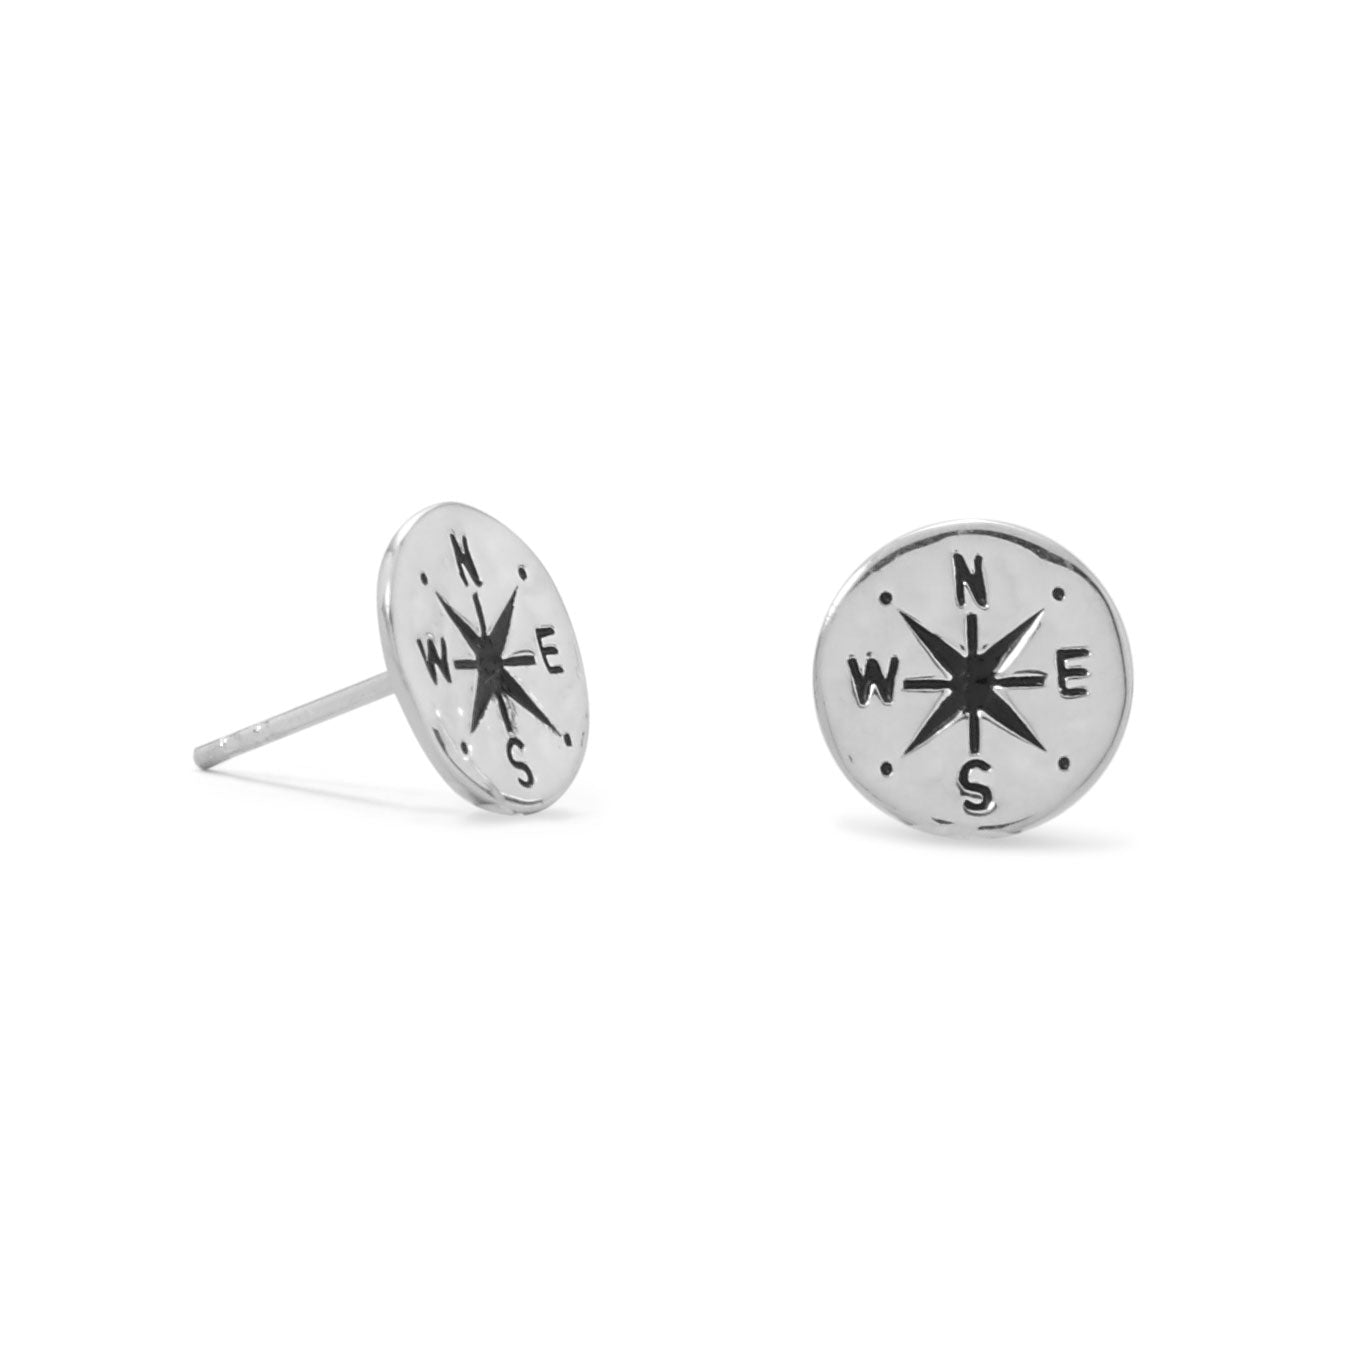 Keep It Moving! Hammered Compass Stud Earrings